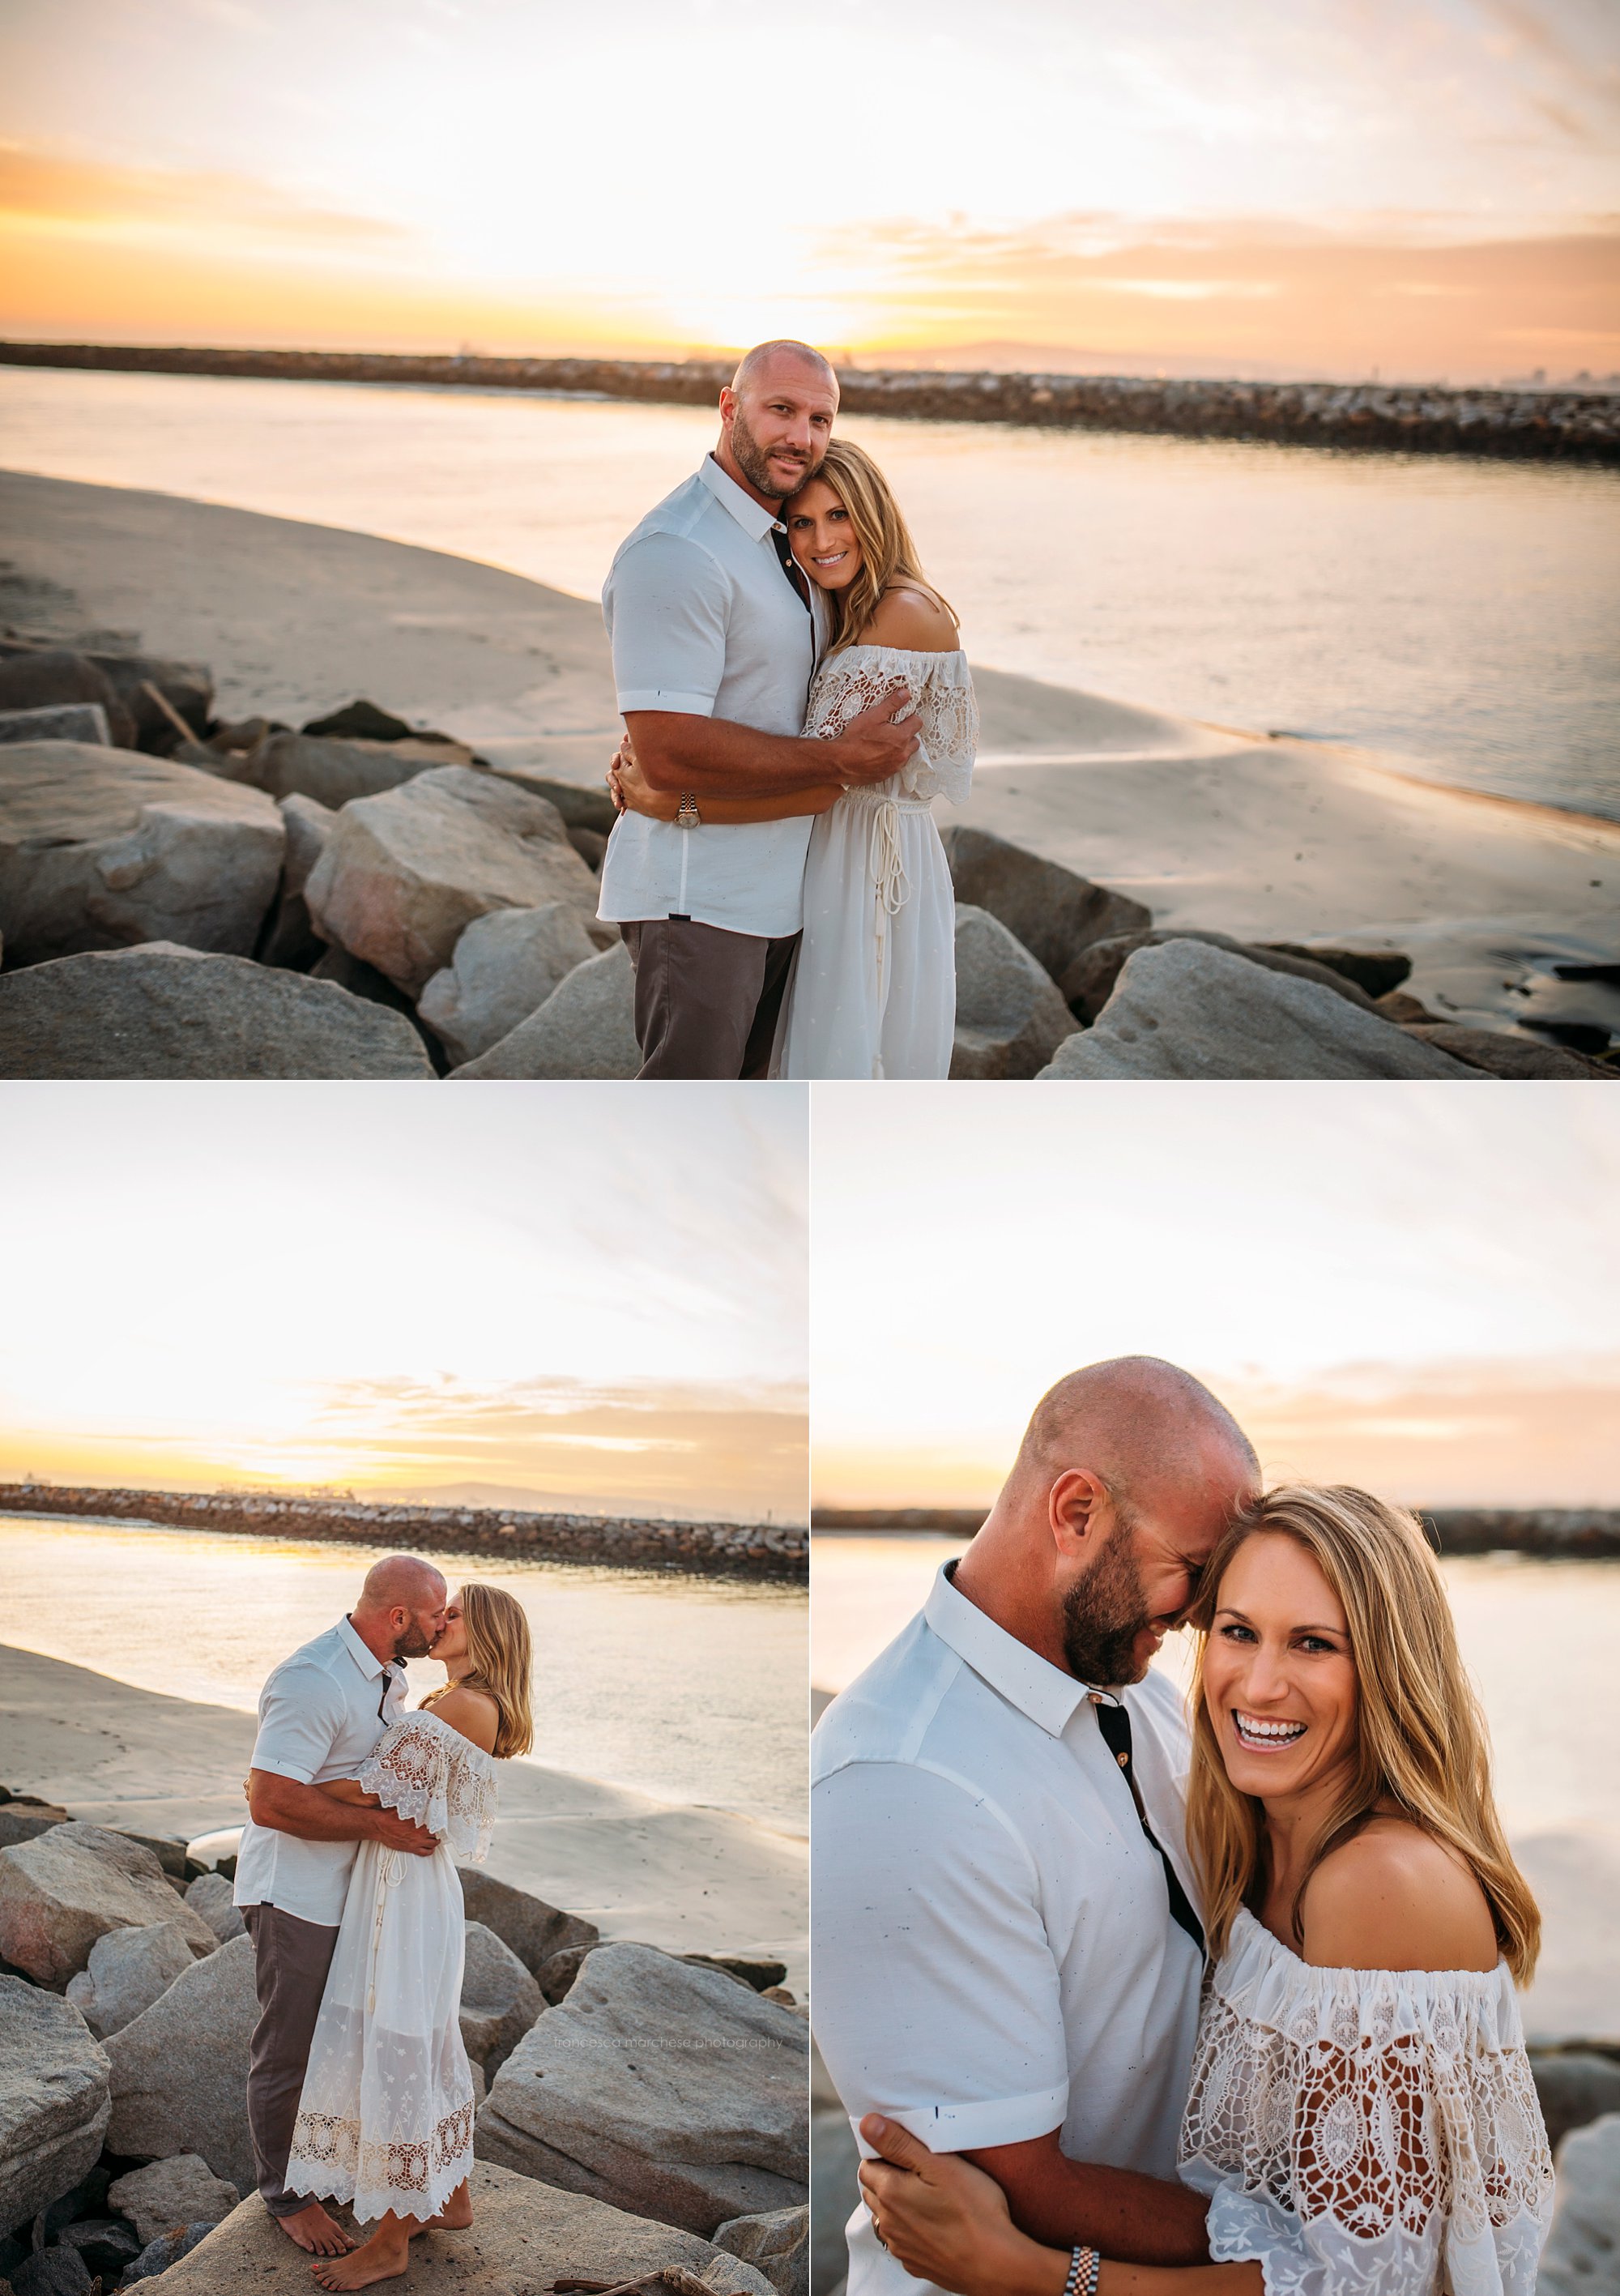 Francesca Marchese Photography couple sunset at the beach during family photography session